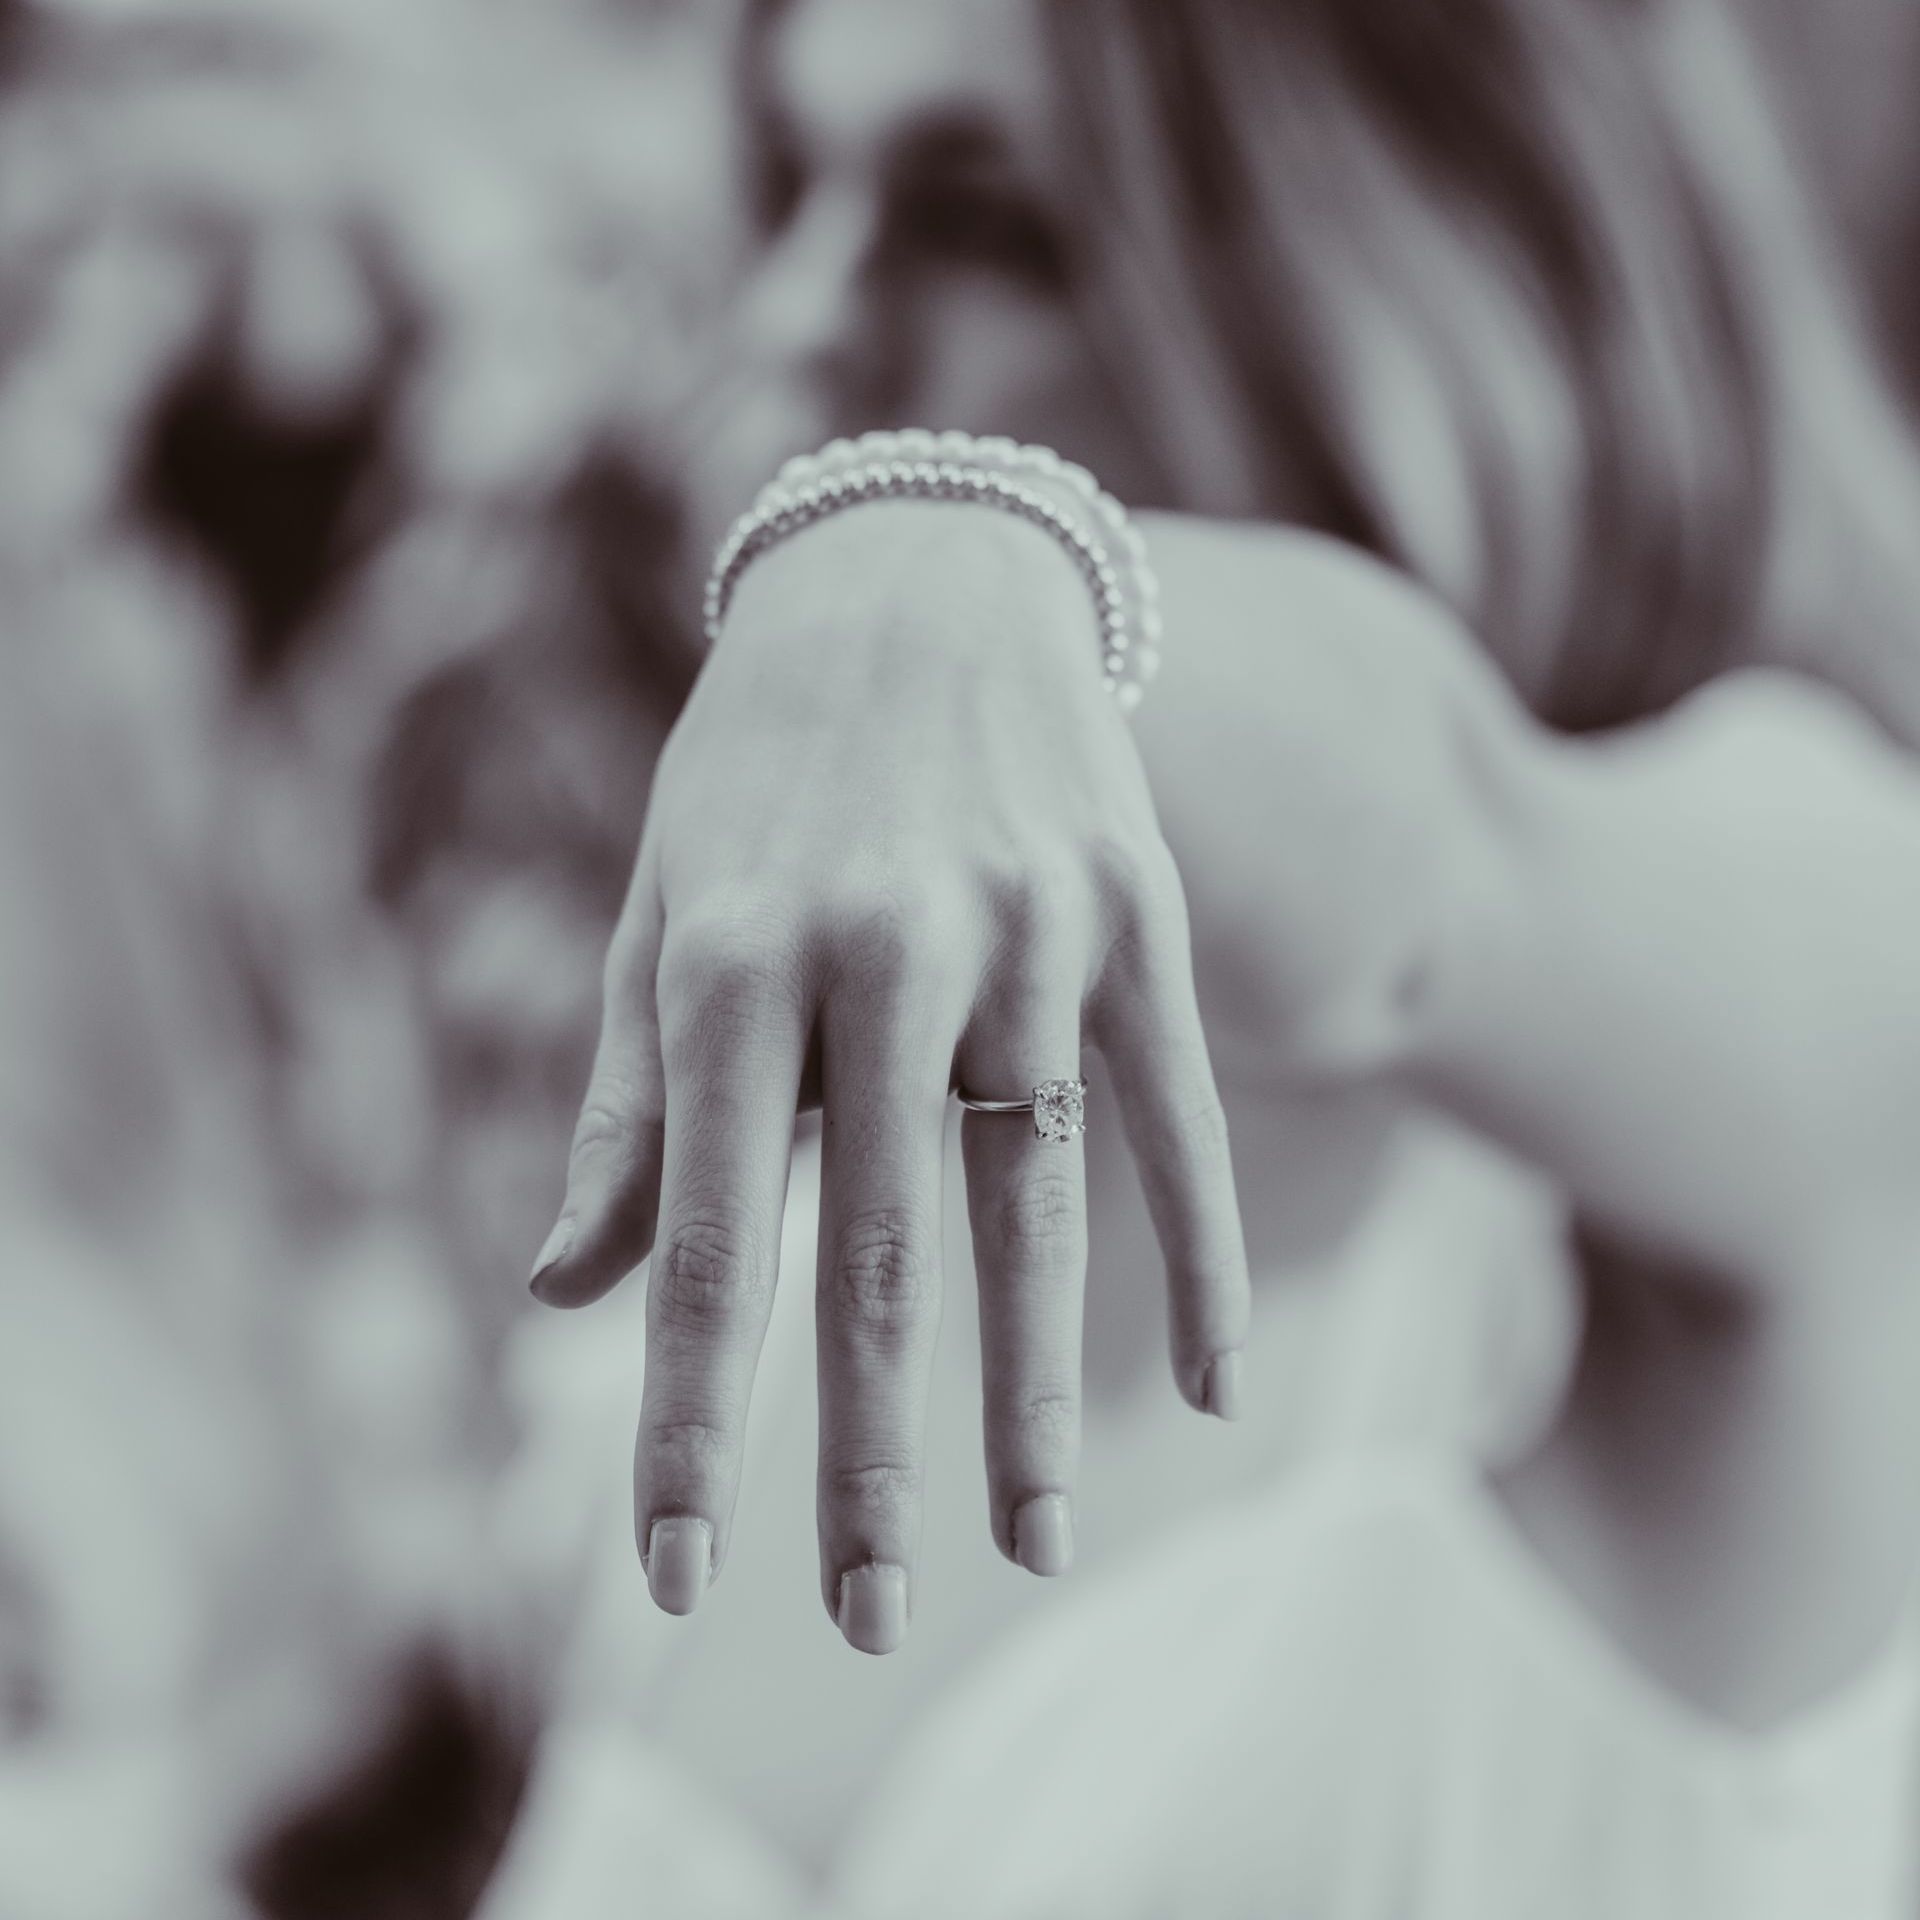 An engaged woman's hand with a wedding ring on it